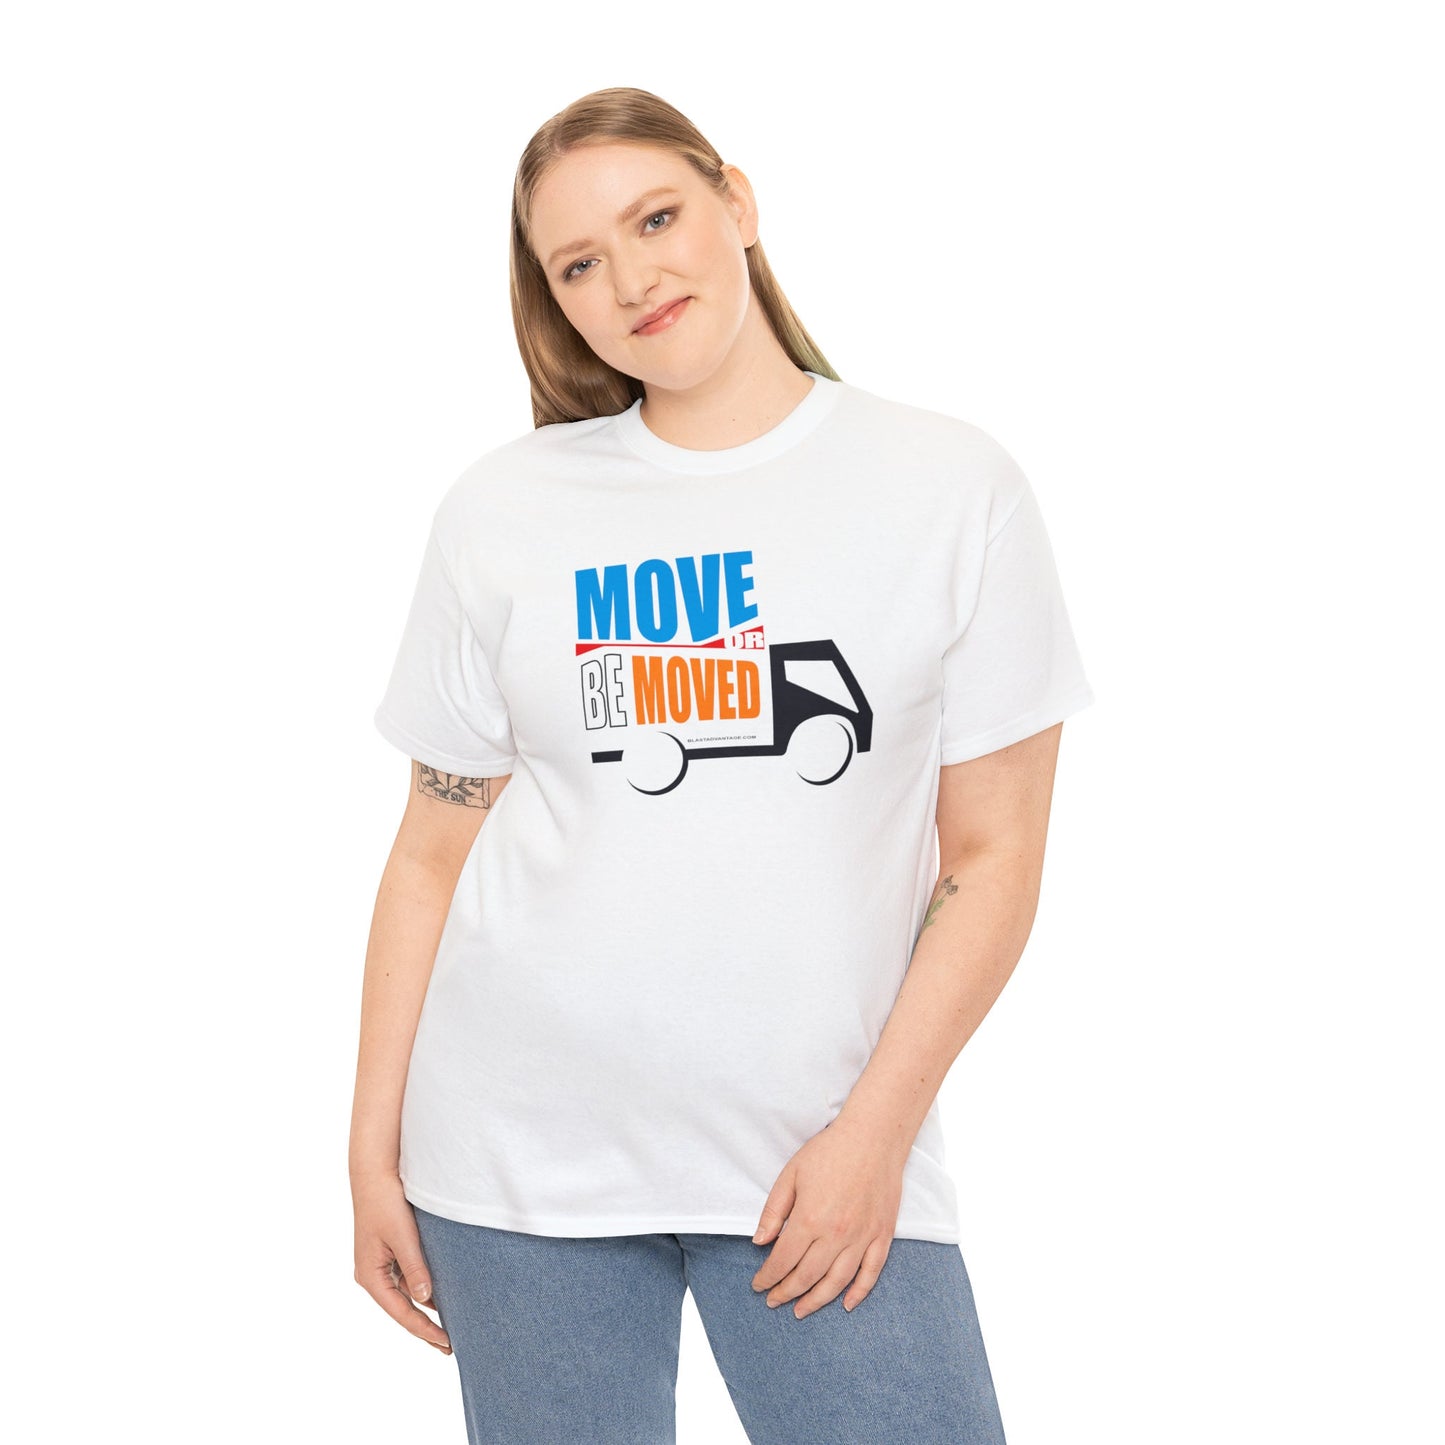 Move or Be Moved T-Shirt, Empowerment, Self-Improvement, Self-Esteem, Daily Reminder